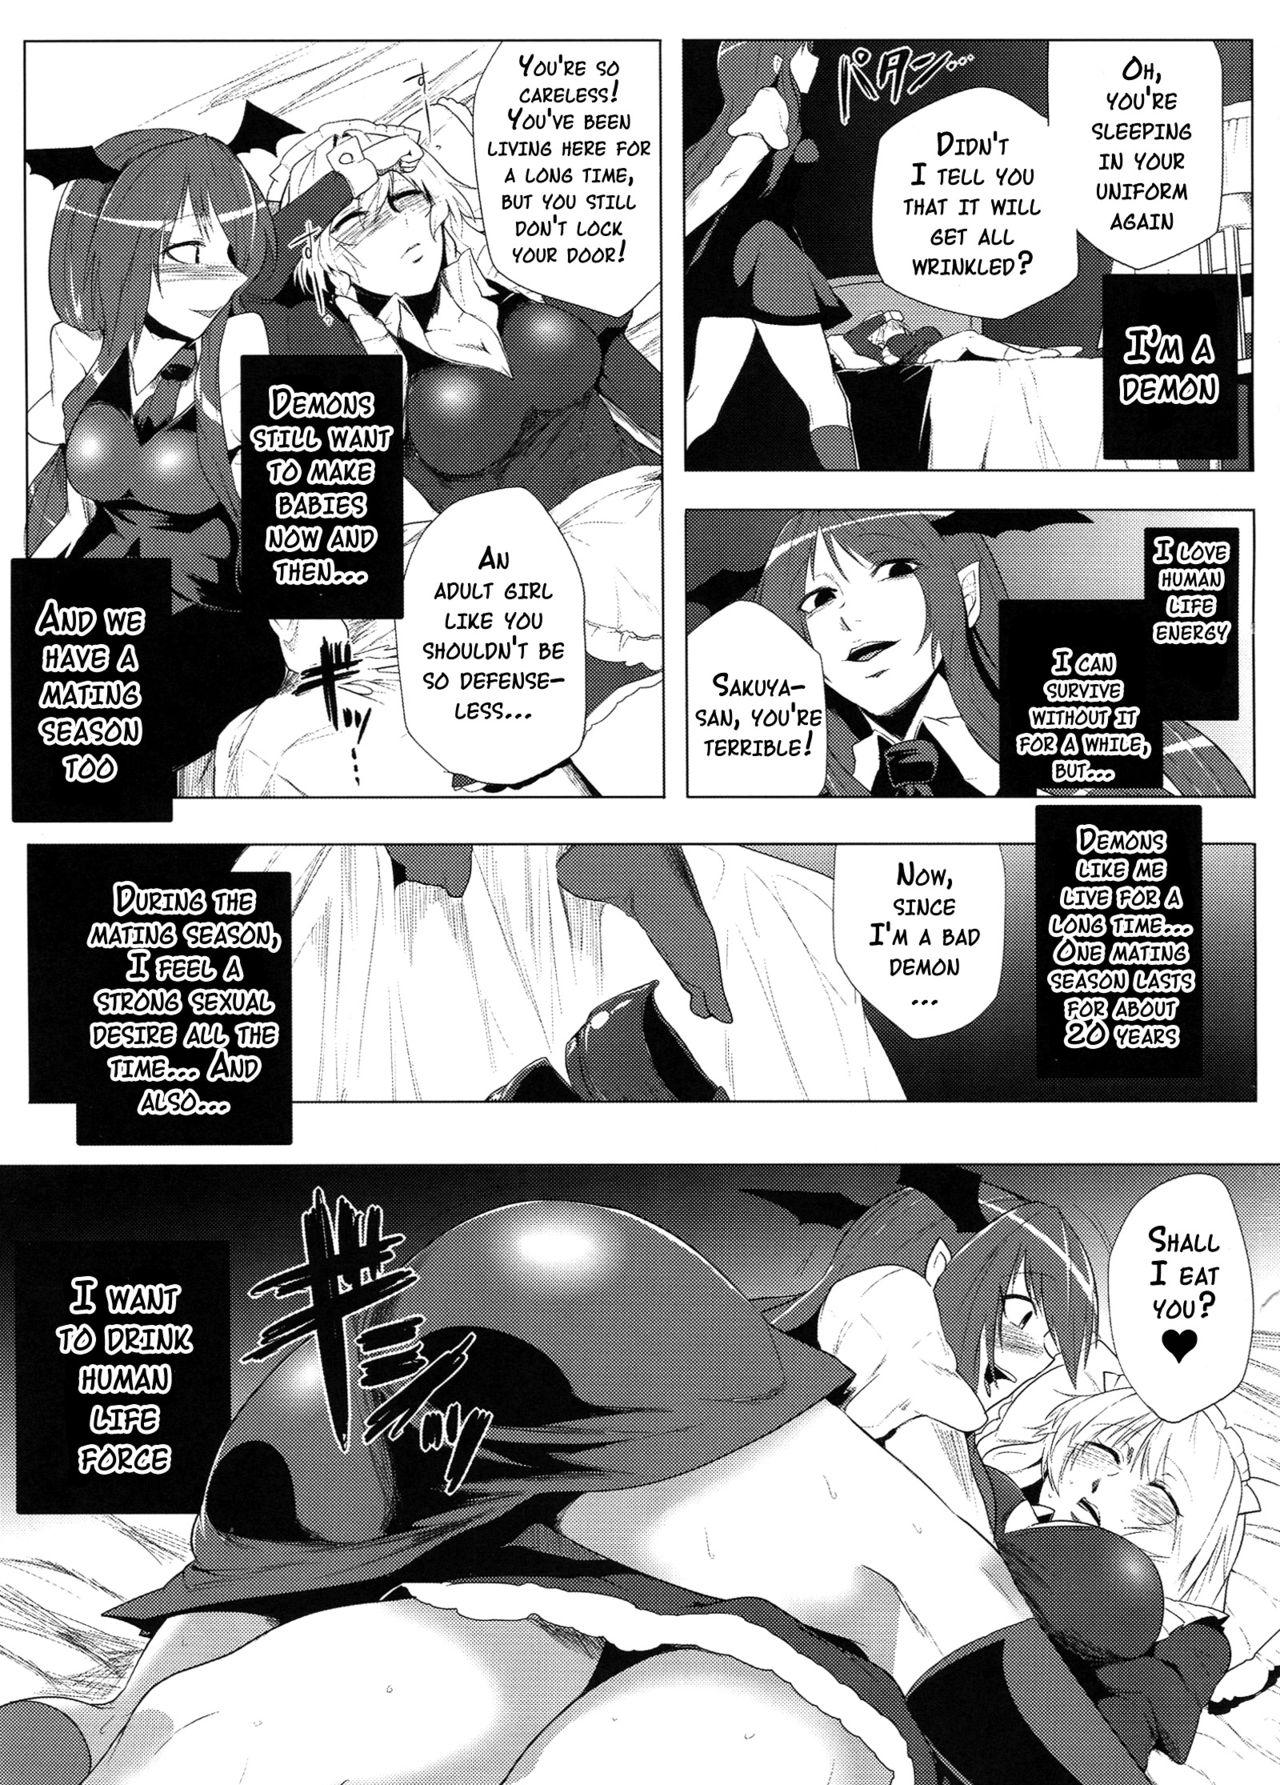 College THE BEGINNING OF THE END OF ETERNITY - Touhou project Mediumtits - Page 8